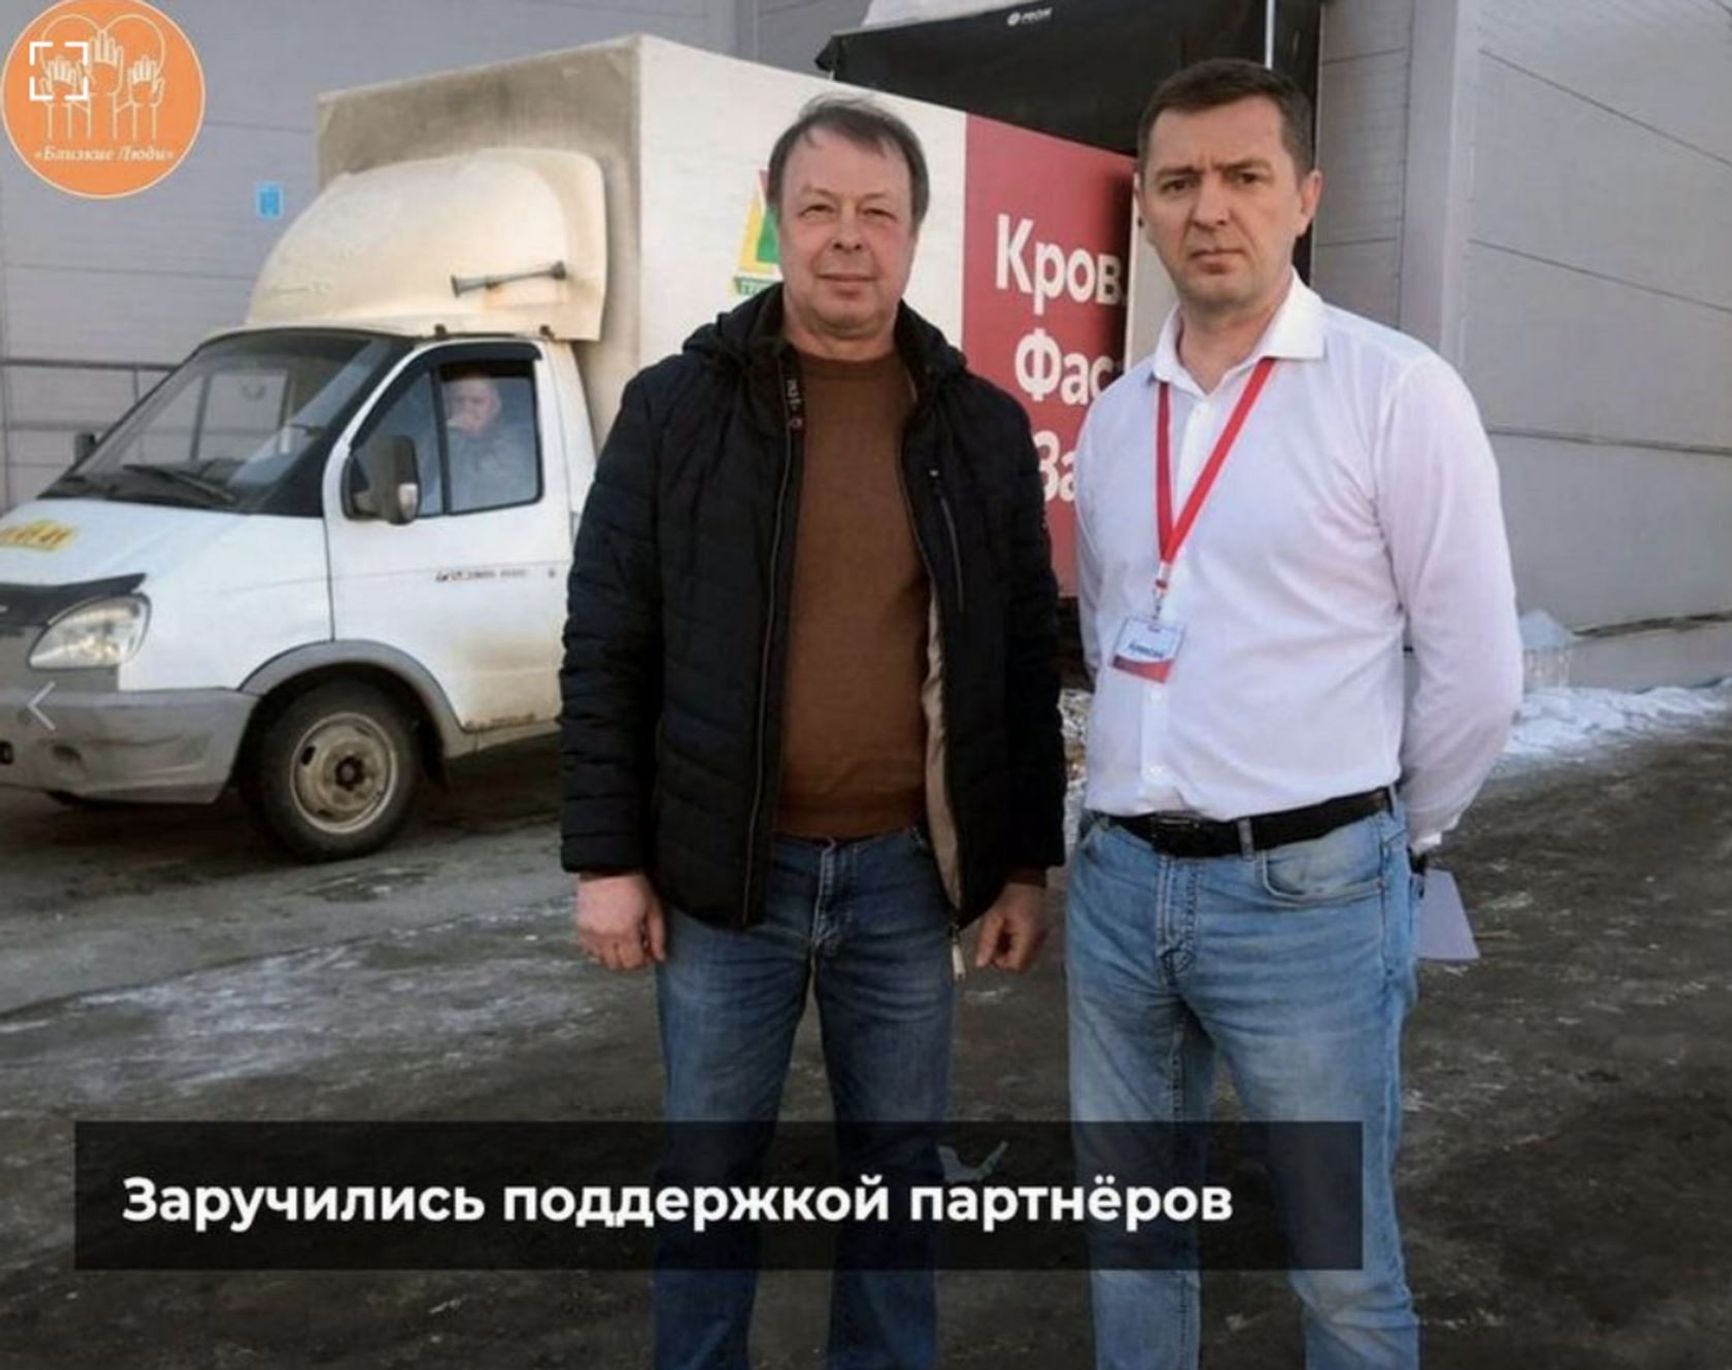 A collector of aid for the mobilized poses with Alexei Sokolov, a security specialist at Auchan in Vladimir